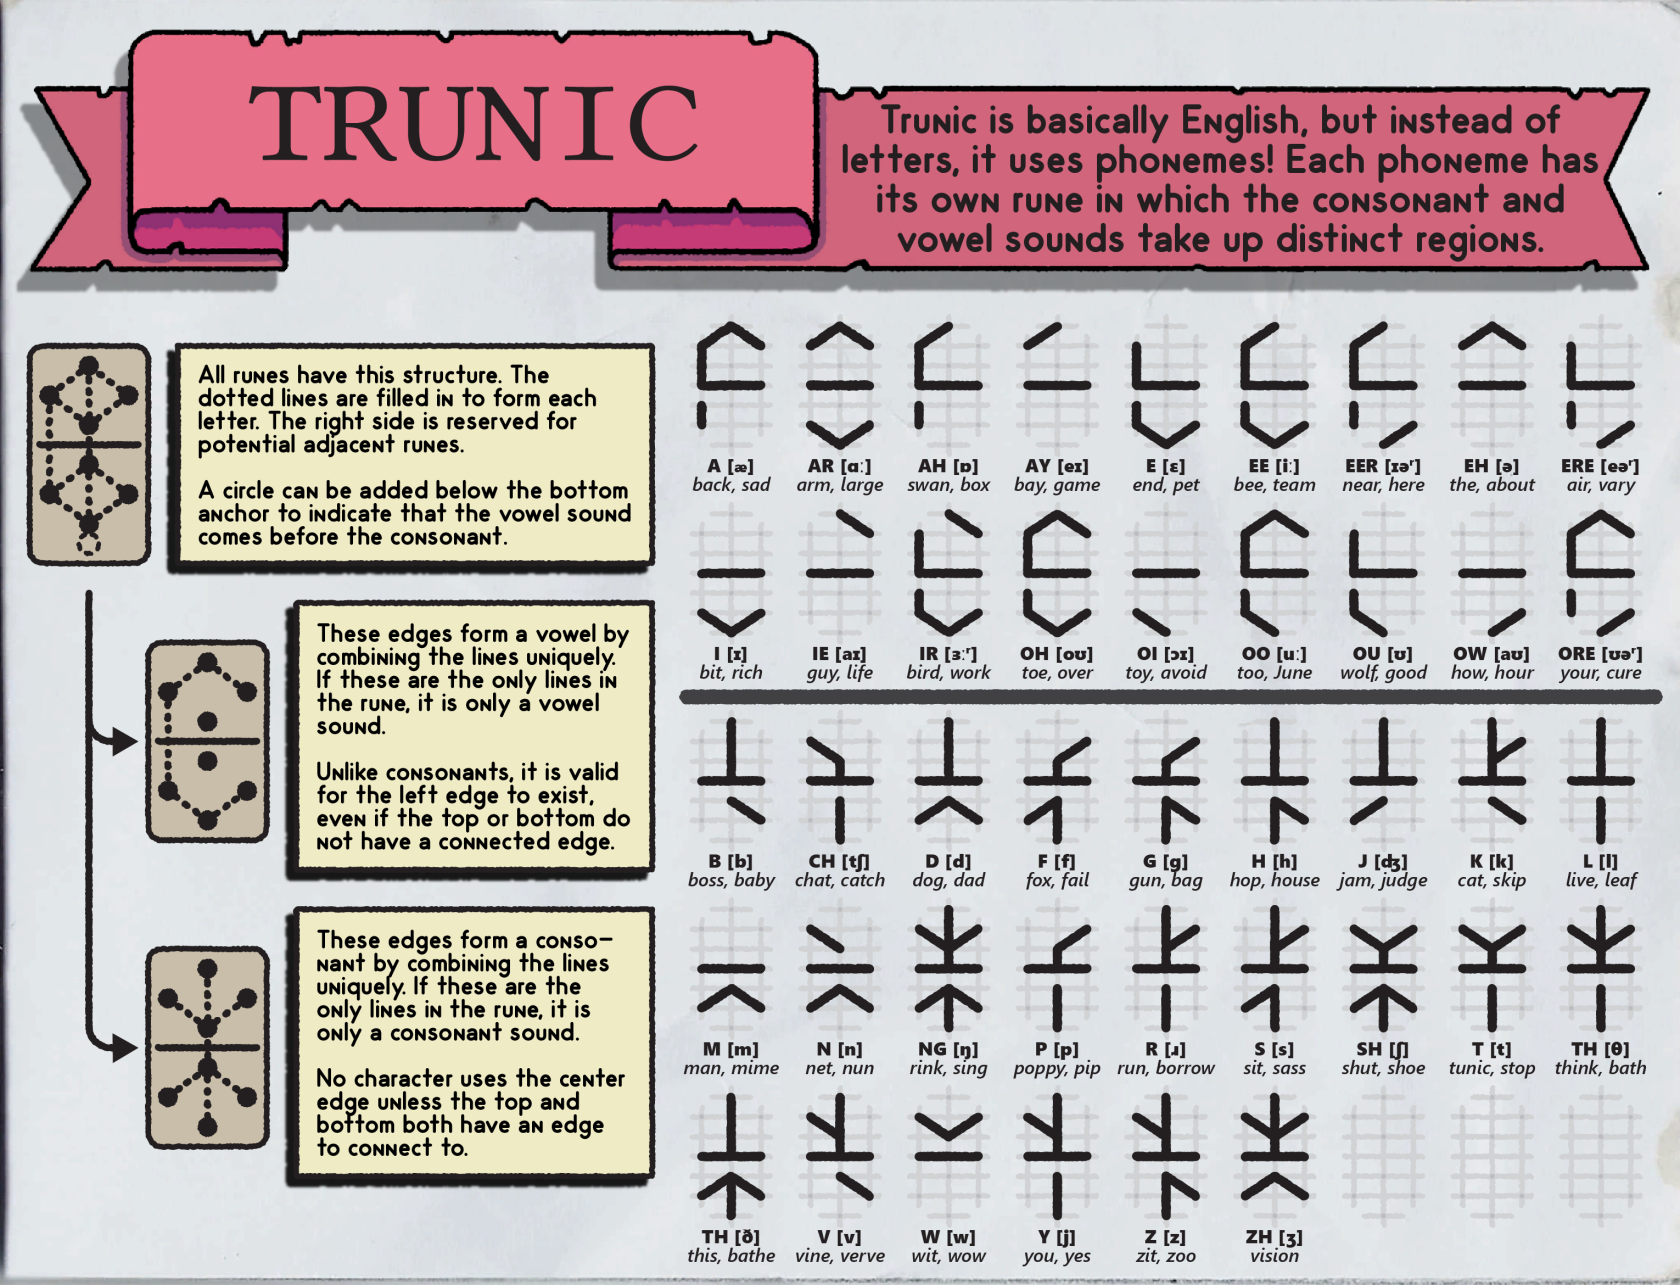 Trunic_New.png